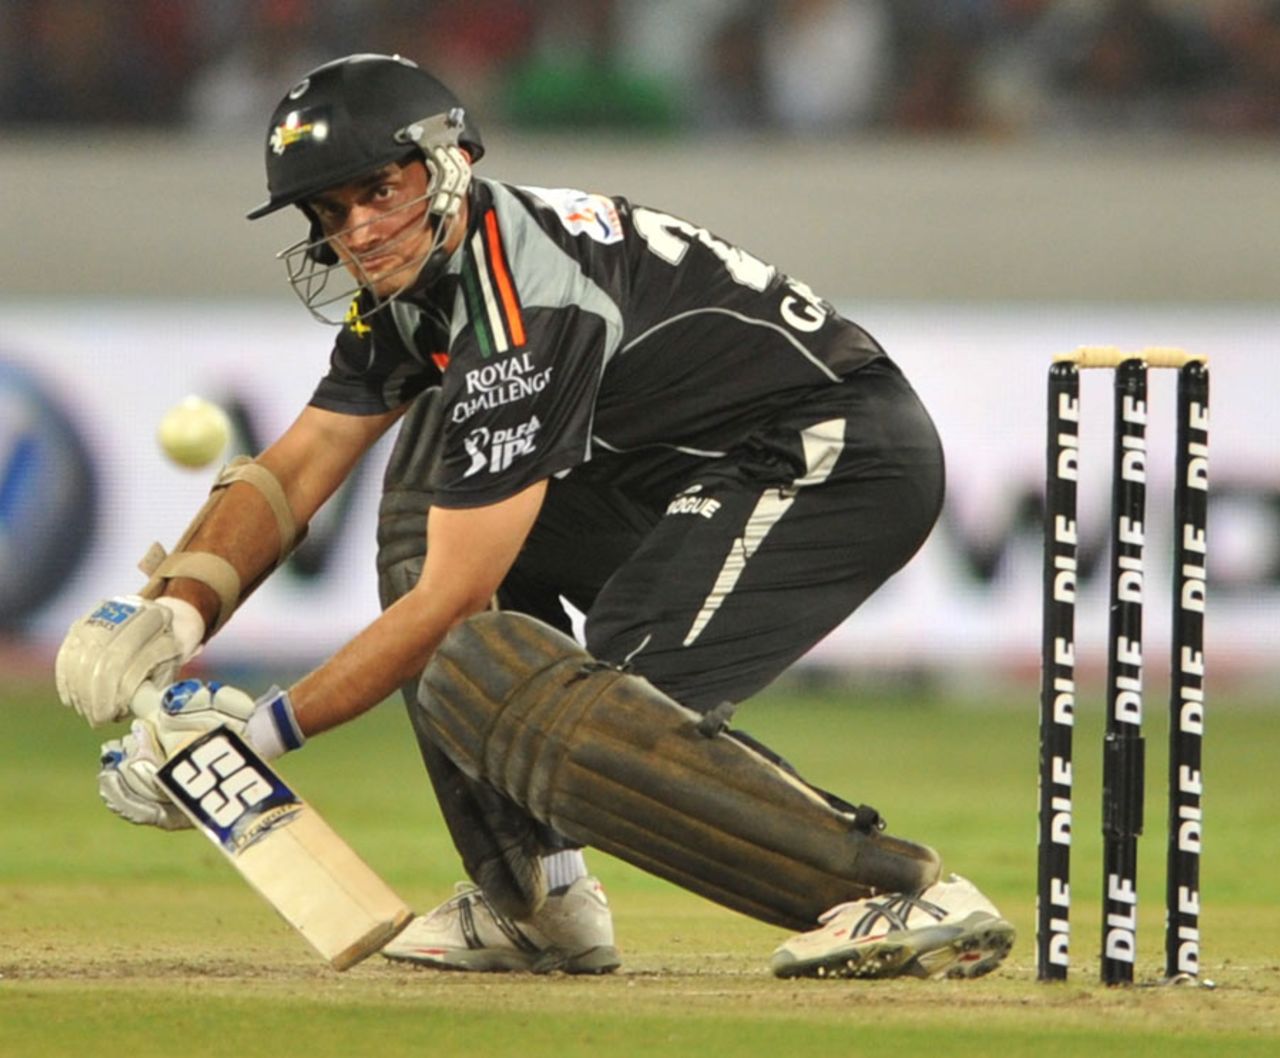 Sourav Ganguly steers a full ball to third man, Deccan Chargers v Pune Warriors, IPL 2011, Hyderabad, April 10, 2011